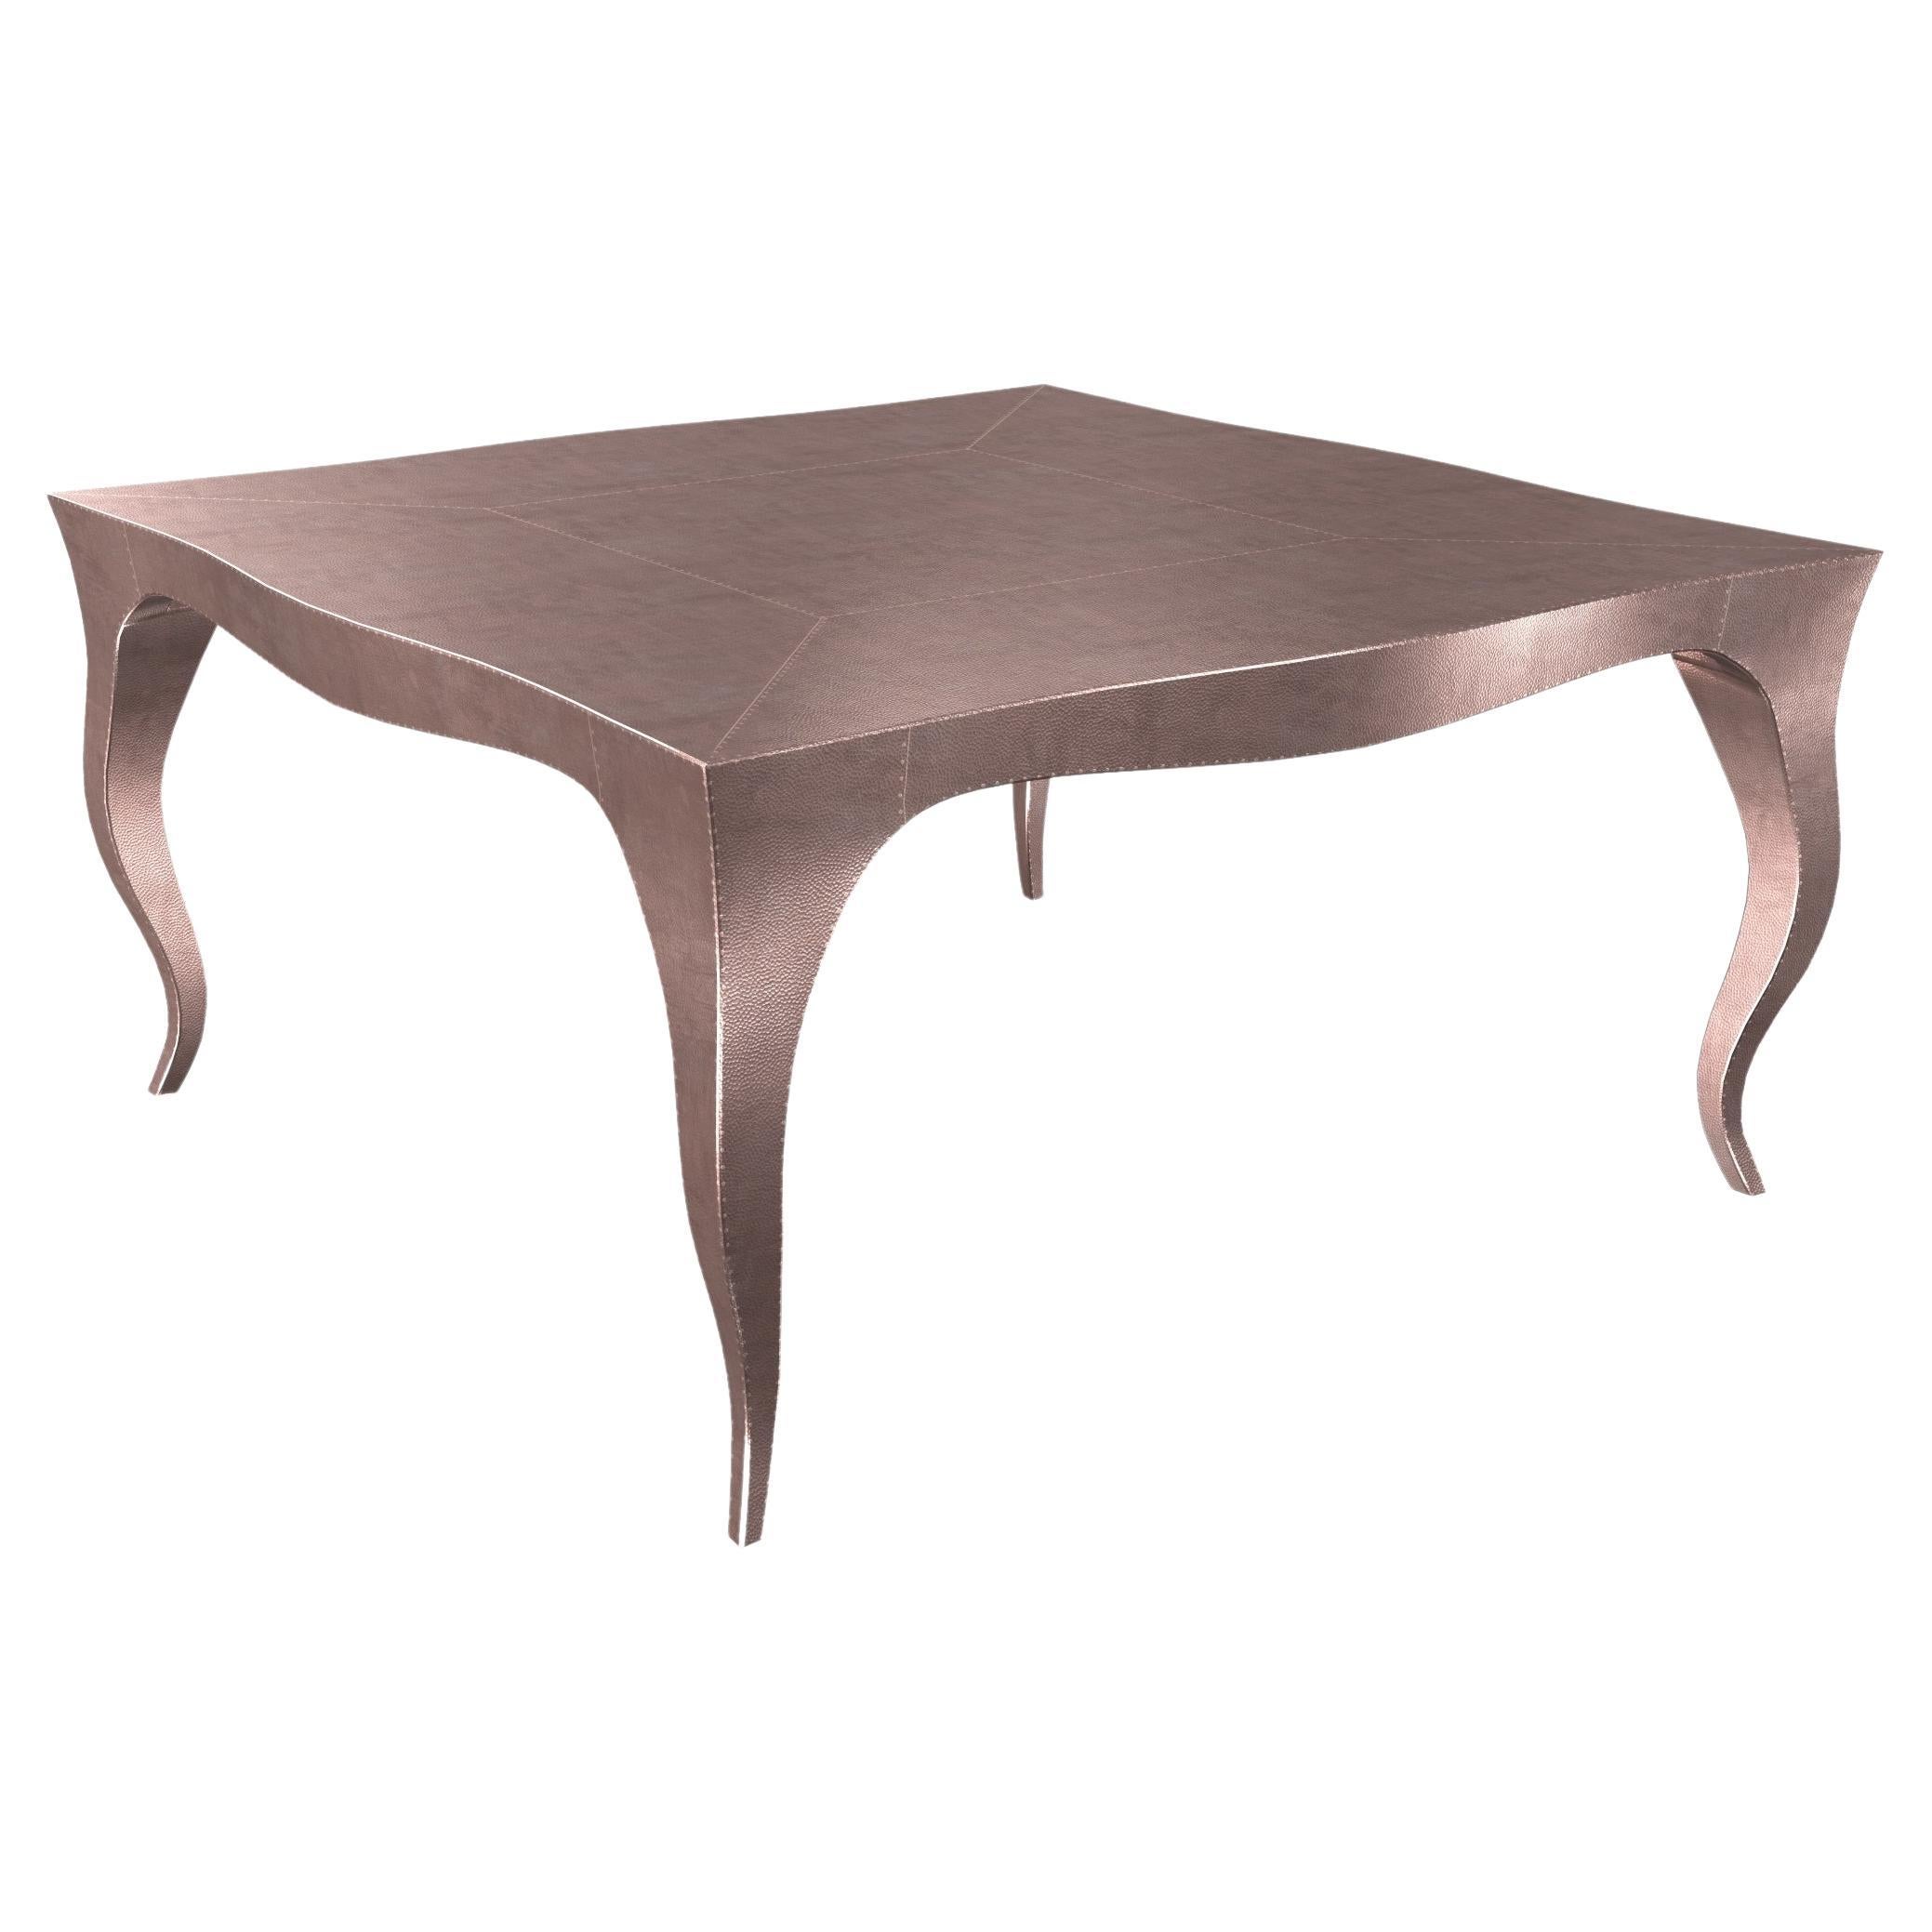 Louise Art Deco Nesting Tables and Stacking Tables Mid. Hammered Copper by Paul For Sale